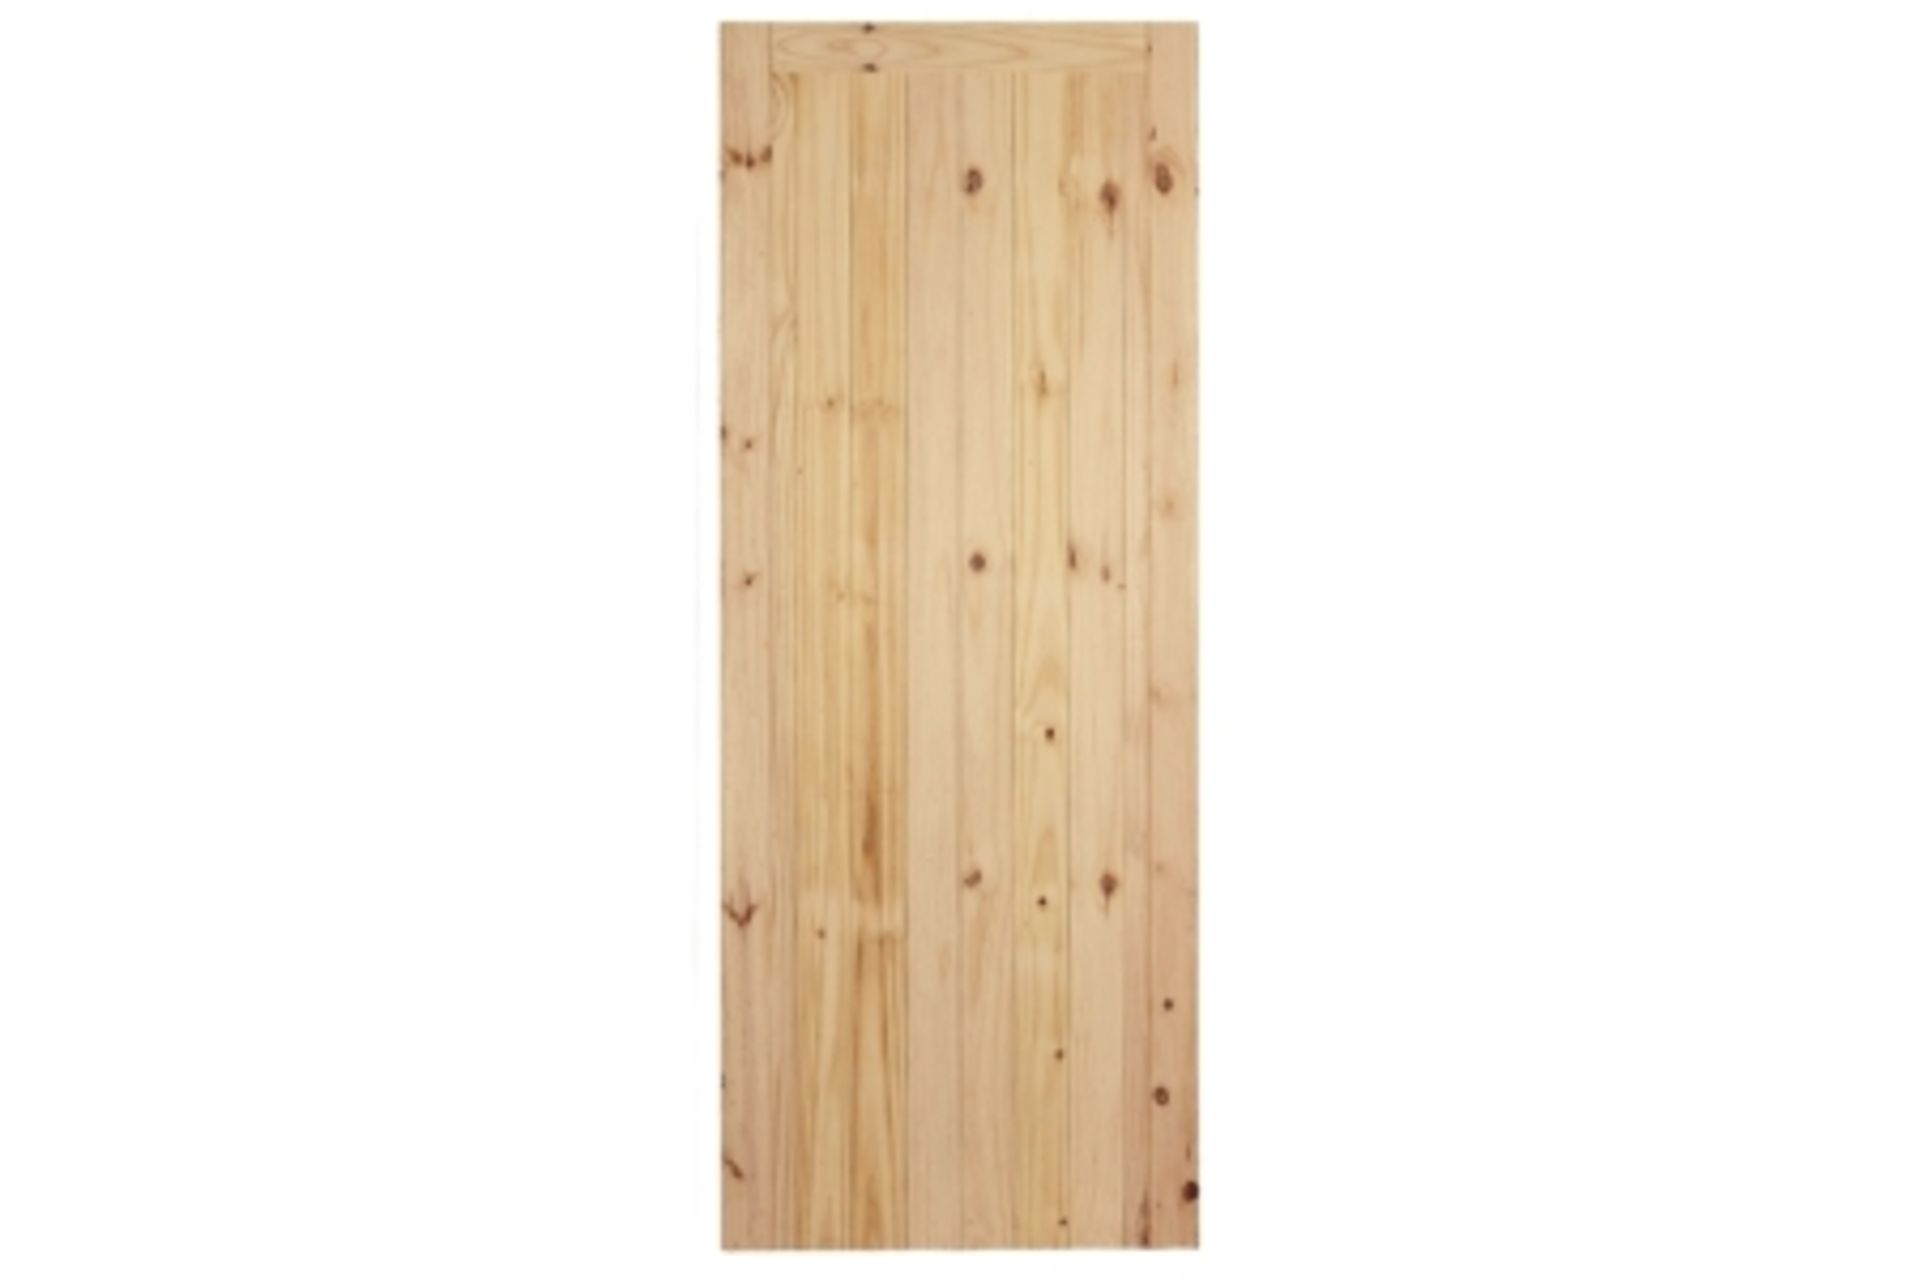 4 X MIXED PANEL DOORS/GLAZED DOORS INCLUDING CLEAR PINE, OAK VENEER, KNOTTY PINES AND MORE (CONTAINS - Image 2 of 5